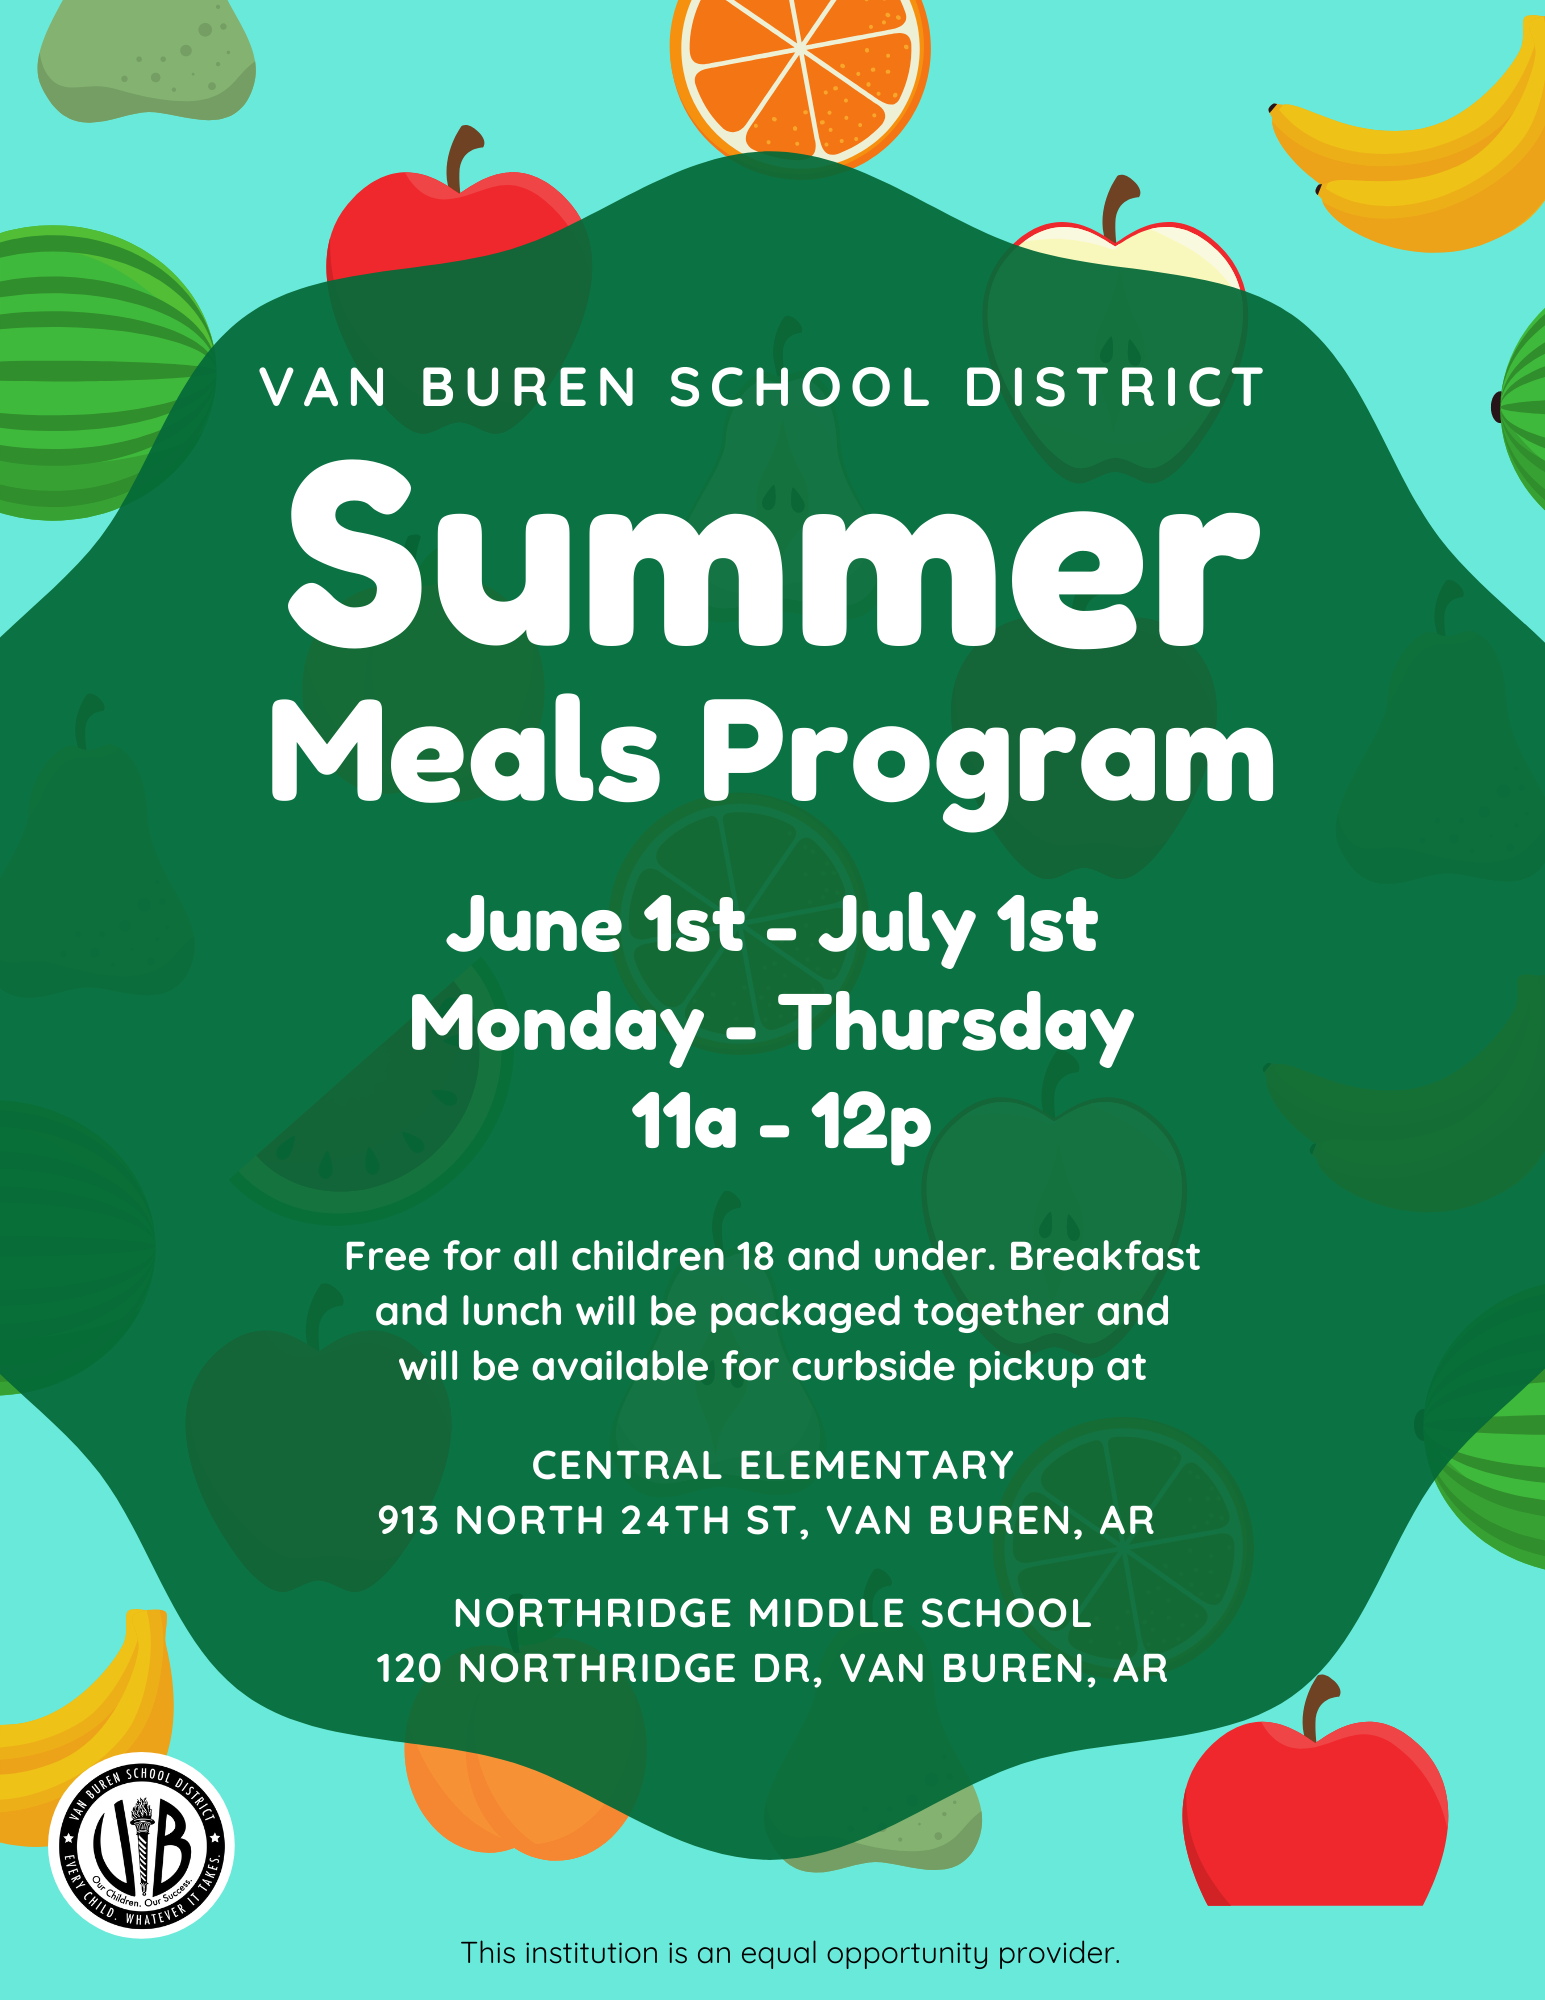 VBSD Summer Meals Program to run June 1 to July 1